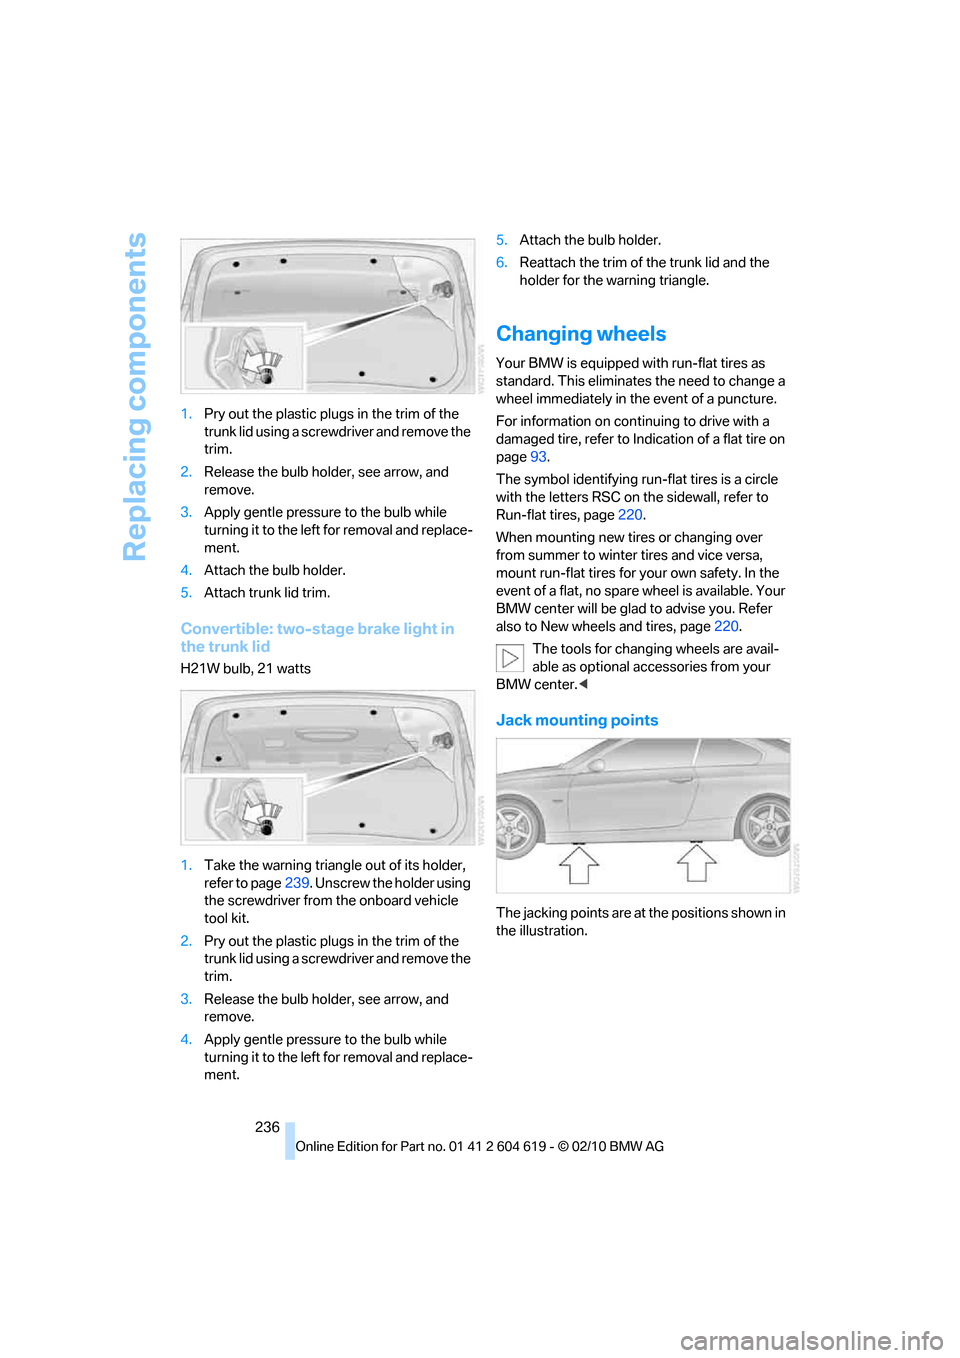 BMW 335IS COUPE 2011 E93 Owners Guide Replacing components
236 1.Pry out the plastic plugs in the trim of the 
trunk lid using a screwdriver and remove the 
trim.
2.Release the bulb holder, see arrow, and 
remove.
3.Apply gentle pressure 